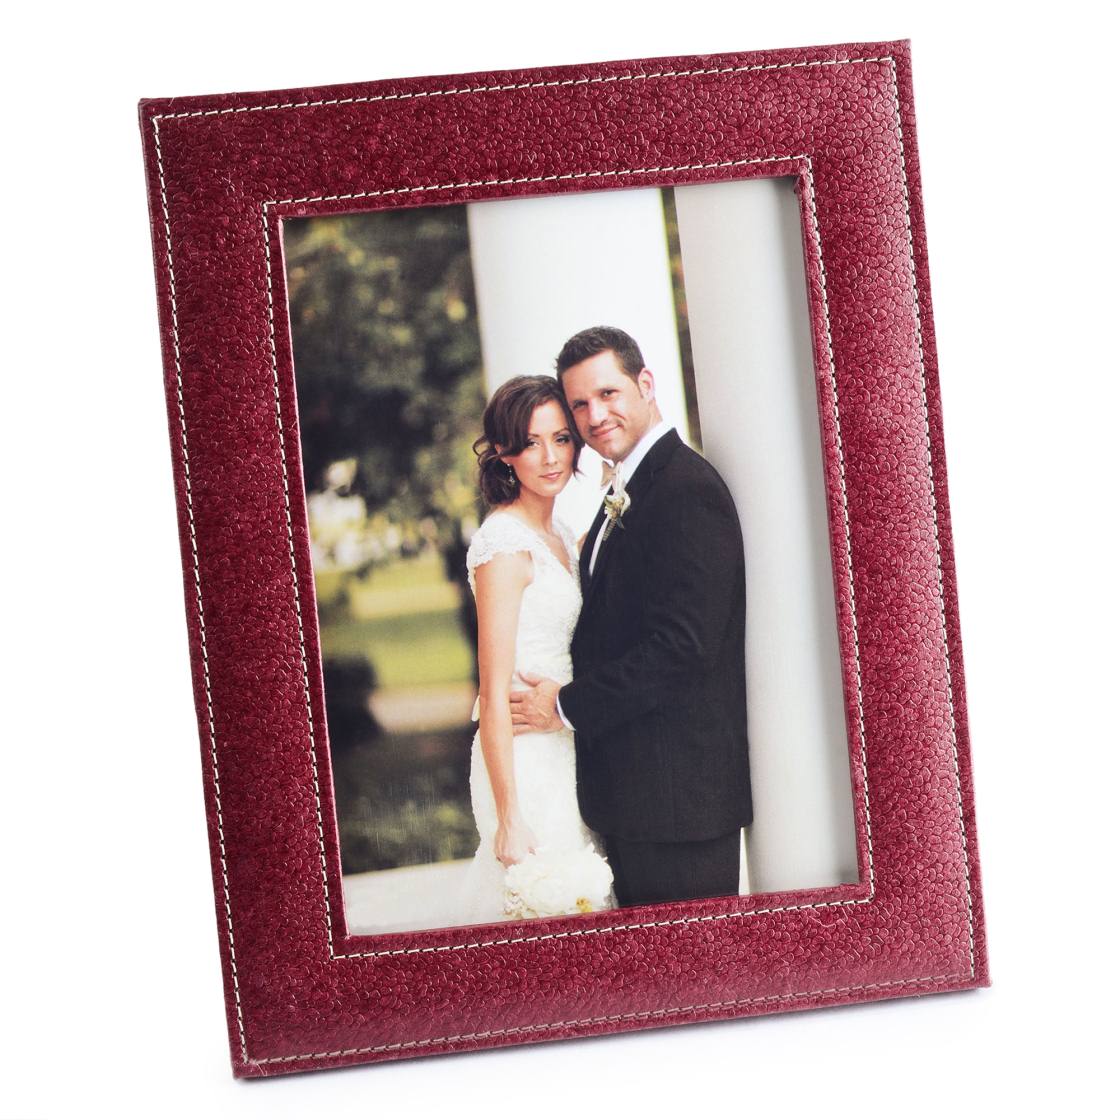 Ecoleatherette 6"x8" Photo Frame with Hanging and Standing Options  (SRPF68.Cherry)